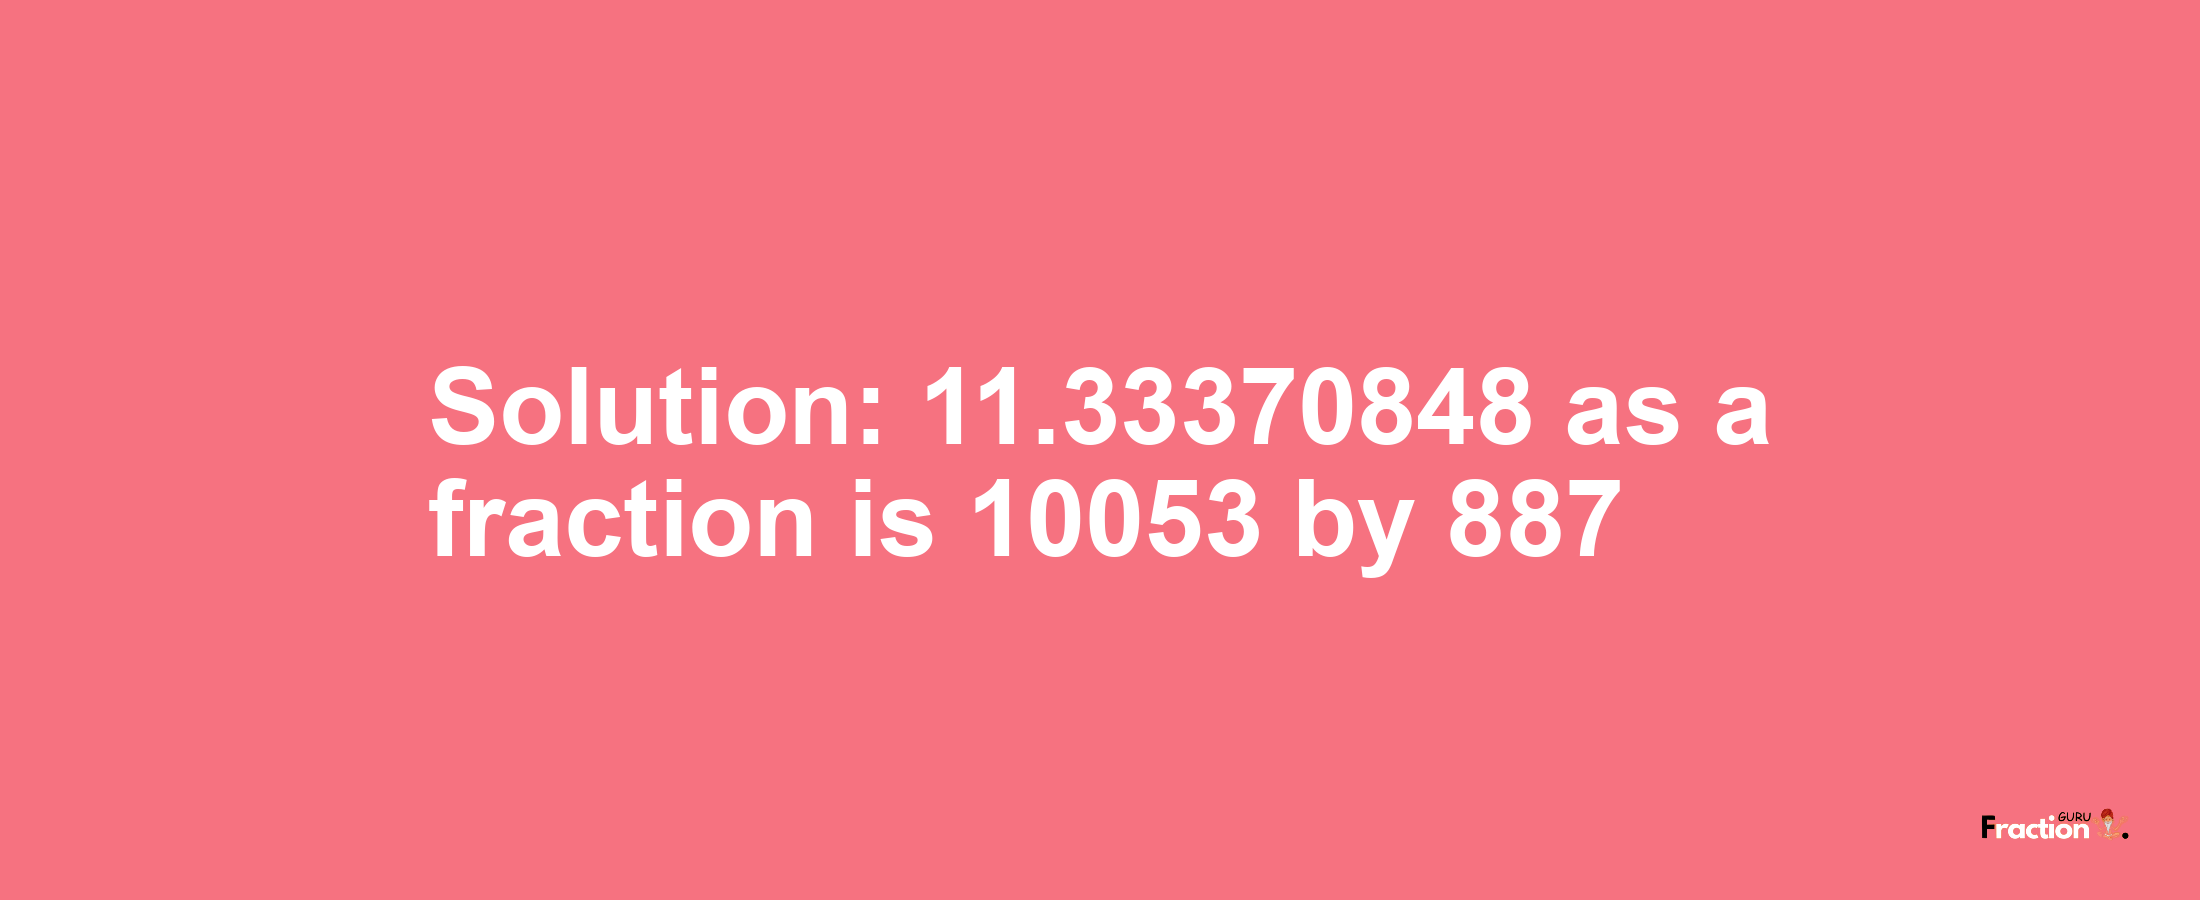 Solution:11.33370848 as a fraction is 10053/887